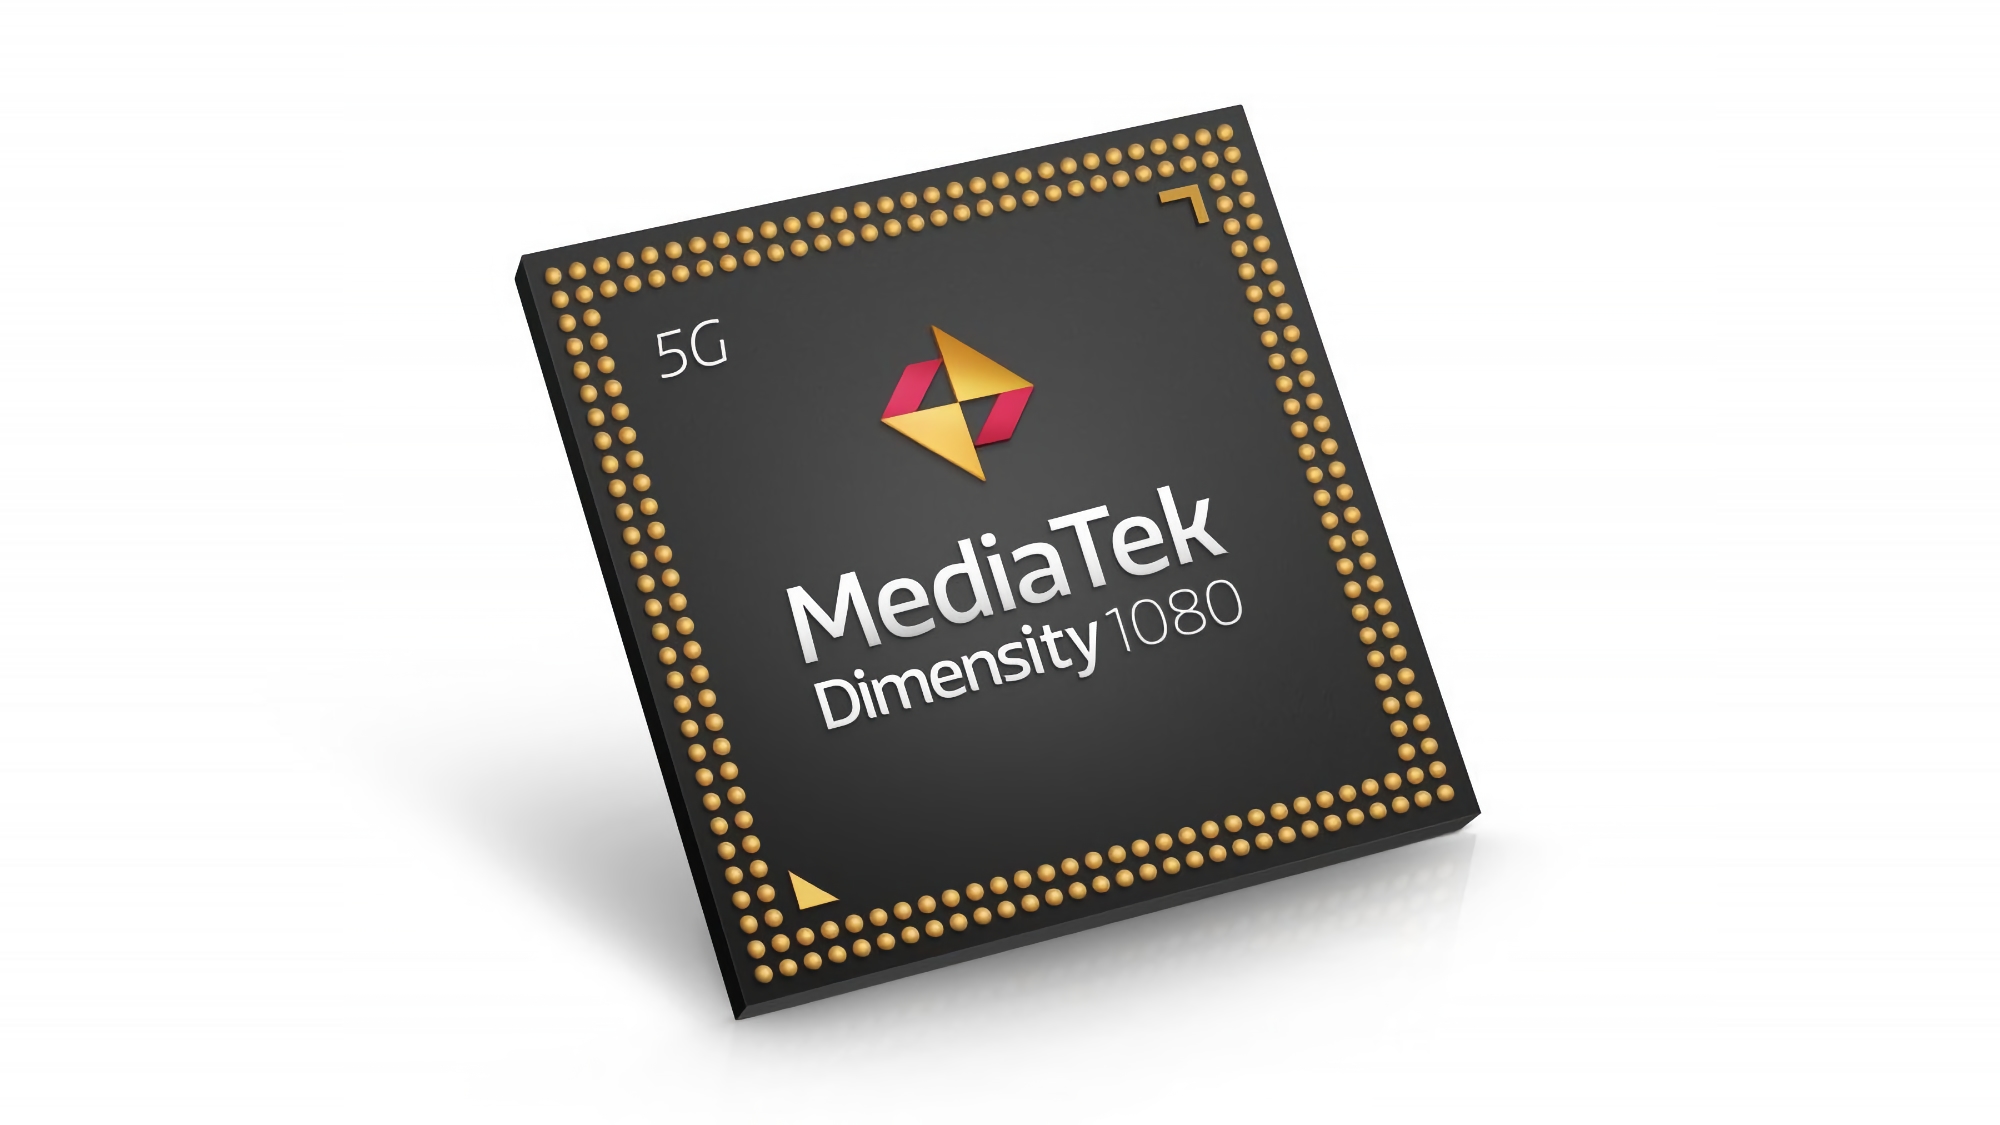 MediaTek introduced the Dimensity 1080: A 6-nanometer processor with support for cameras up to 200 MP